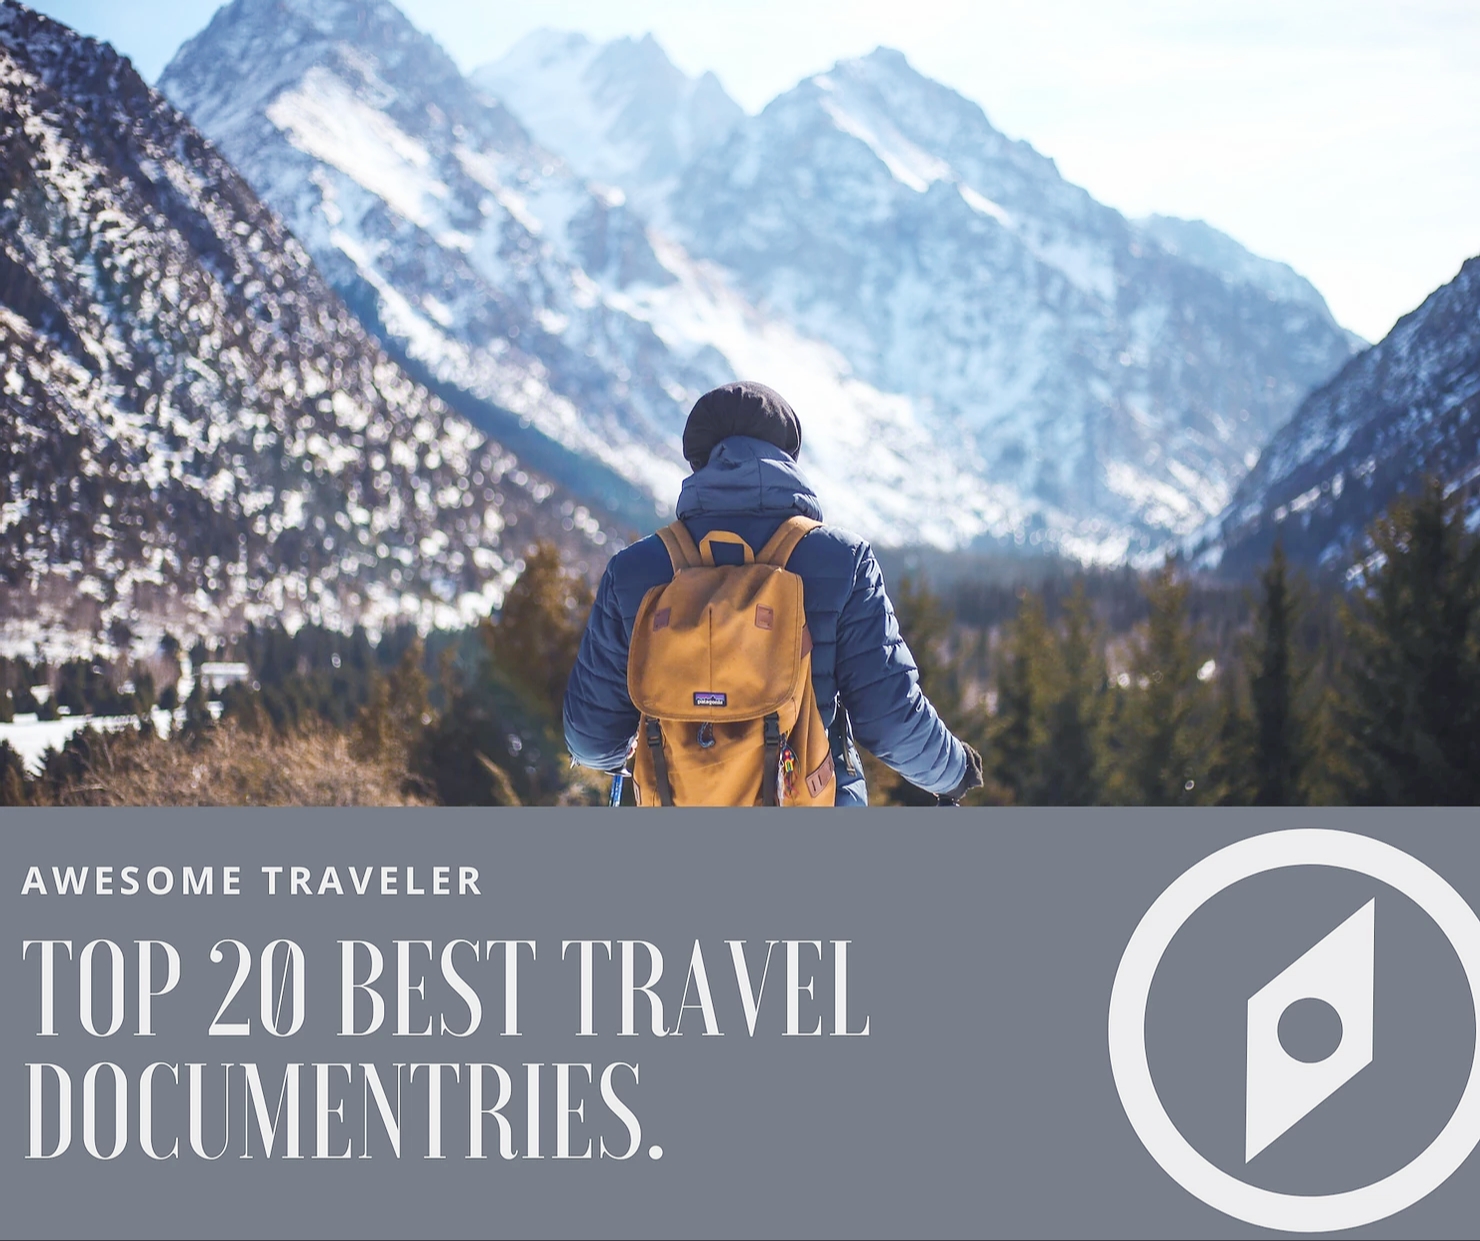 Top 20 Best Travel Documentaries: Awesome Traveler